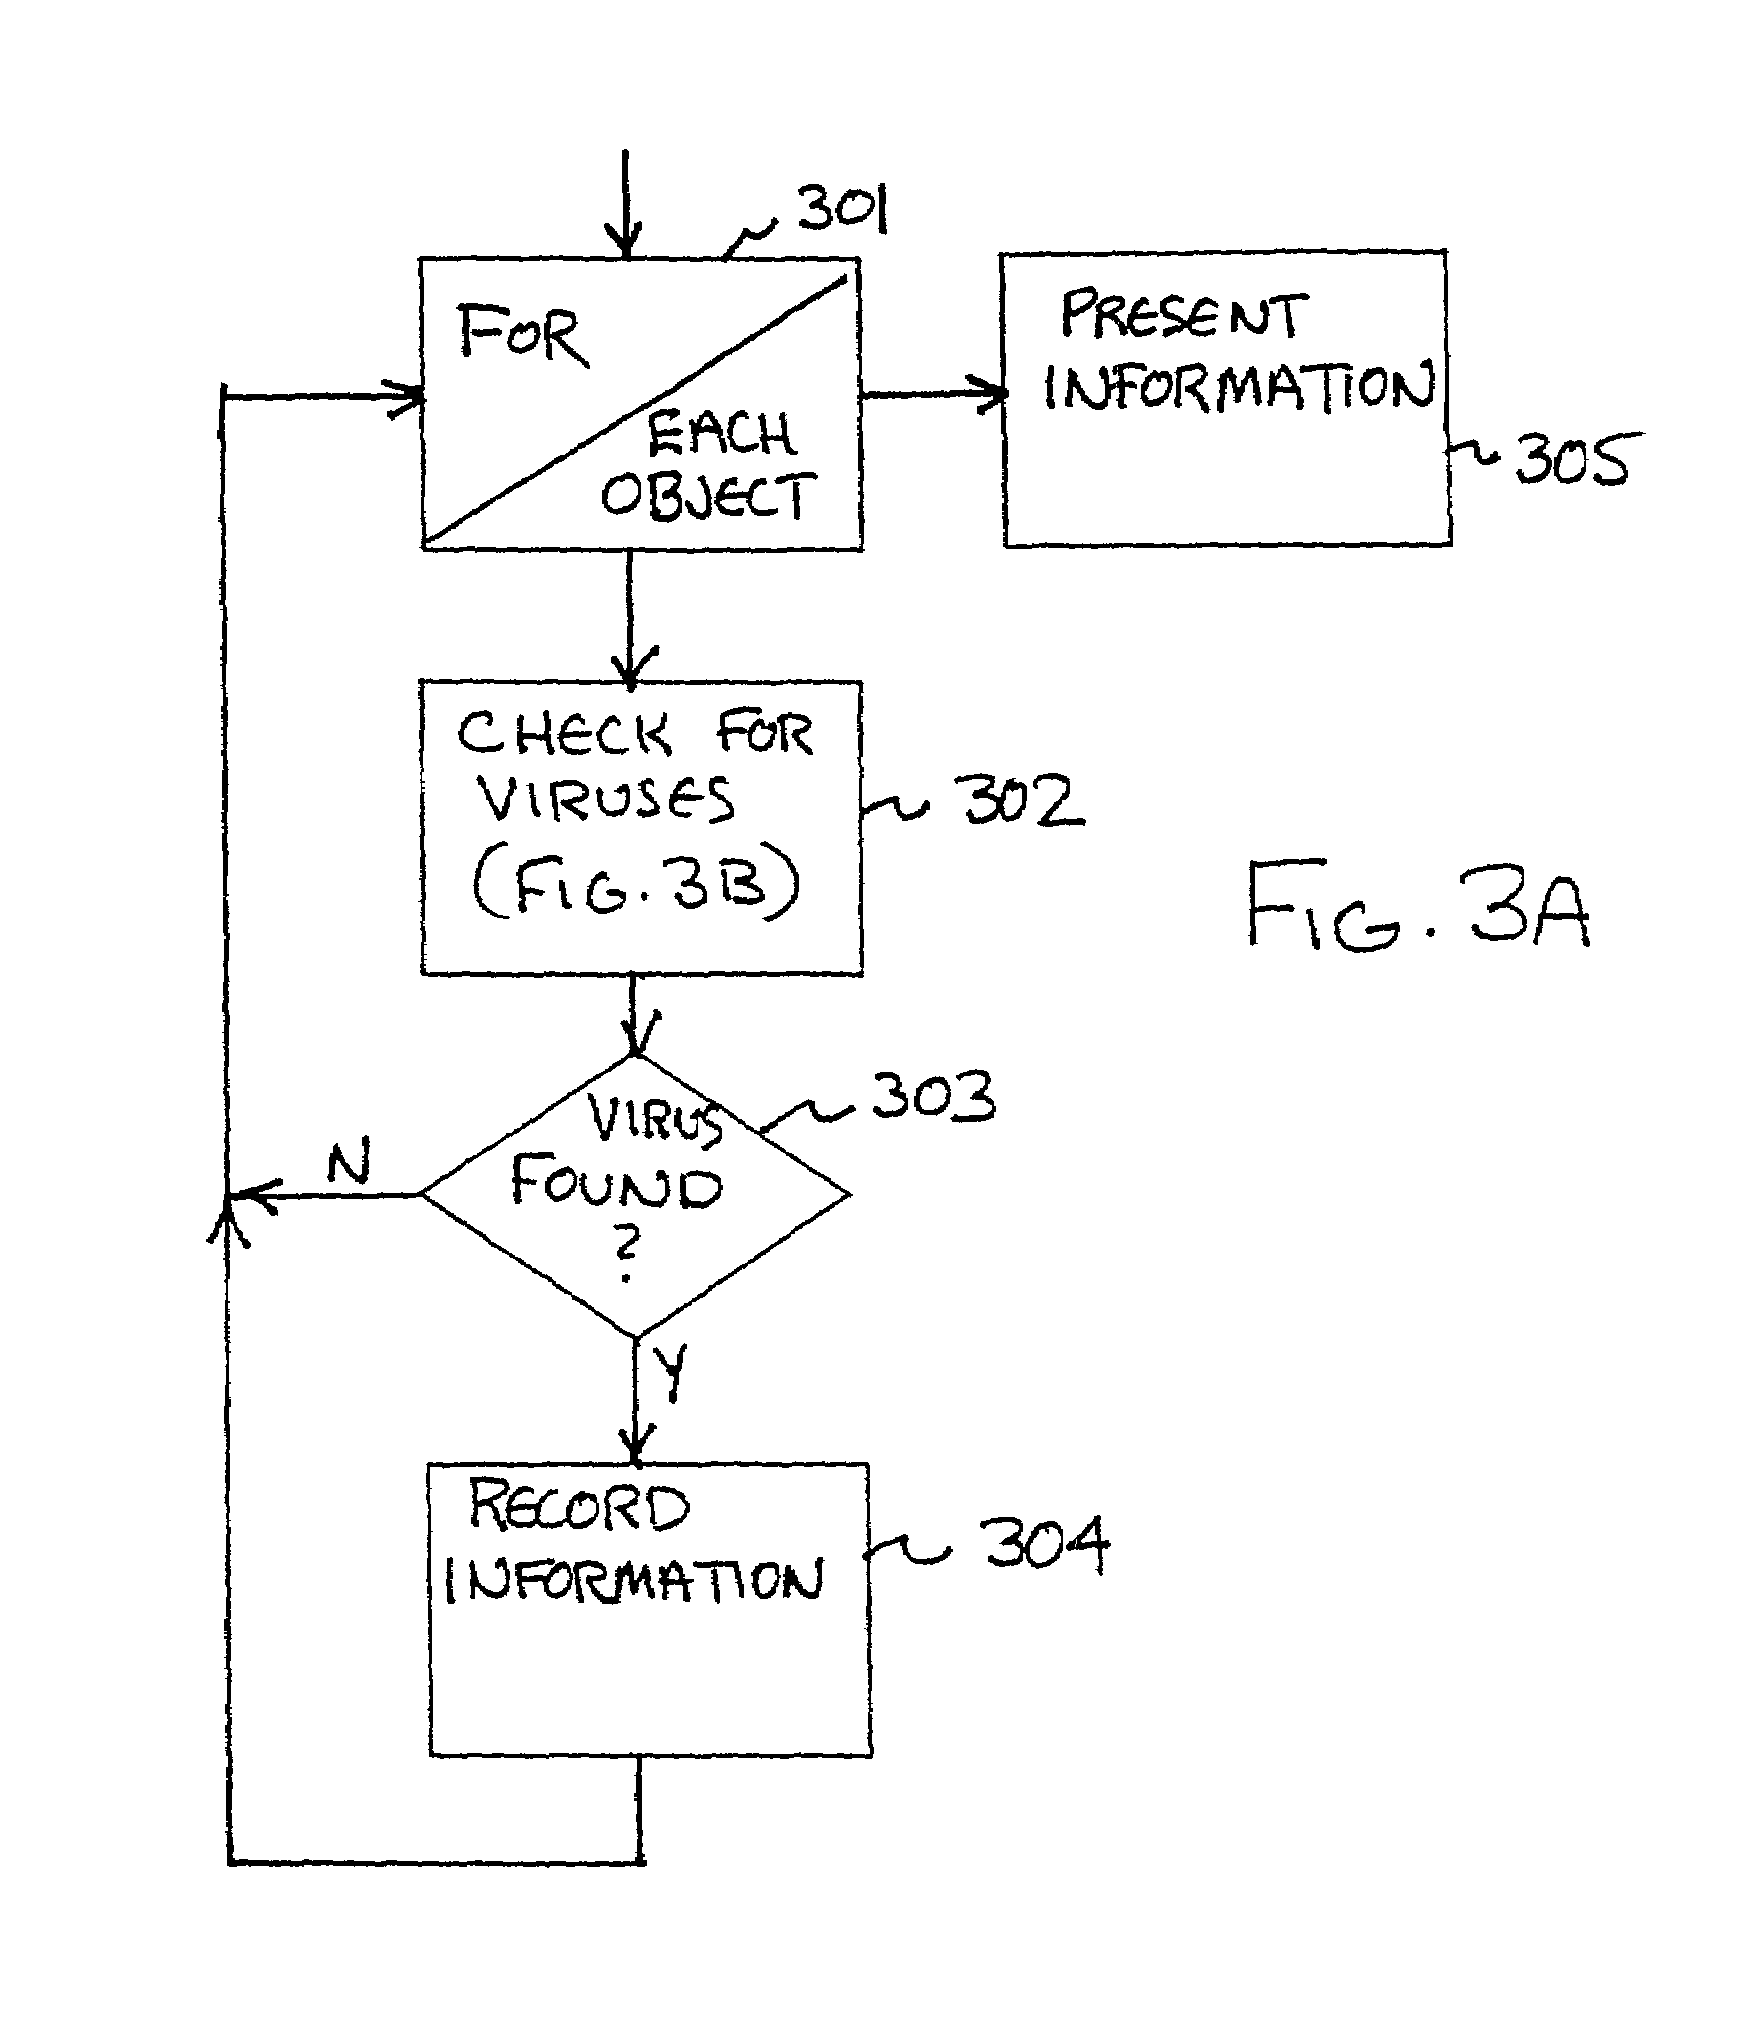 Method and apparatus for increasing virus detection speed using a database